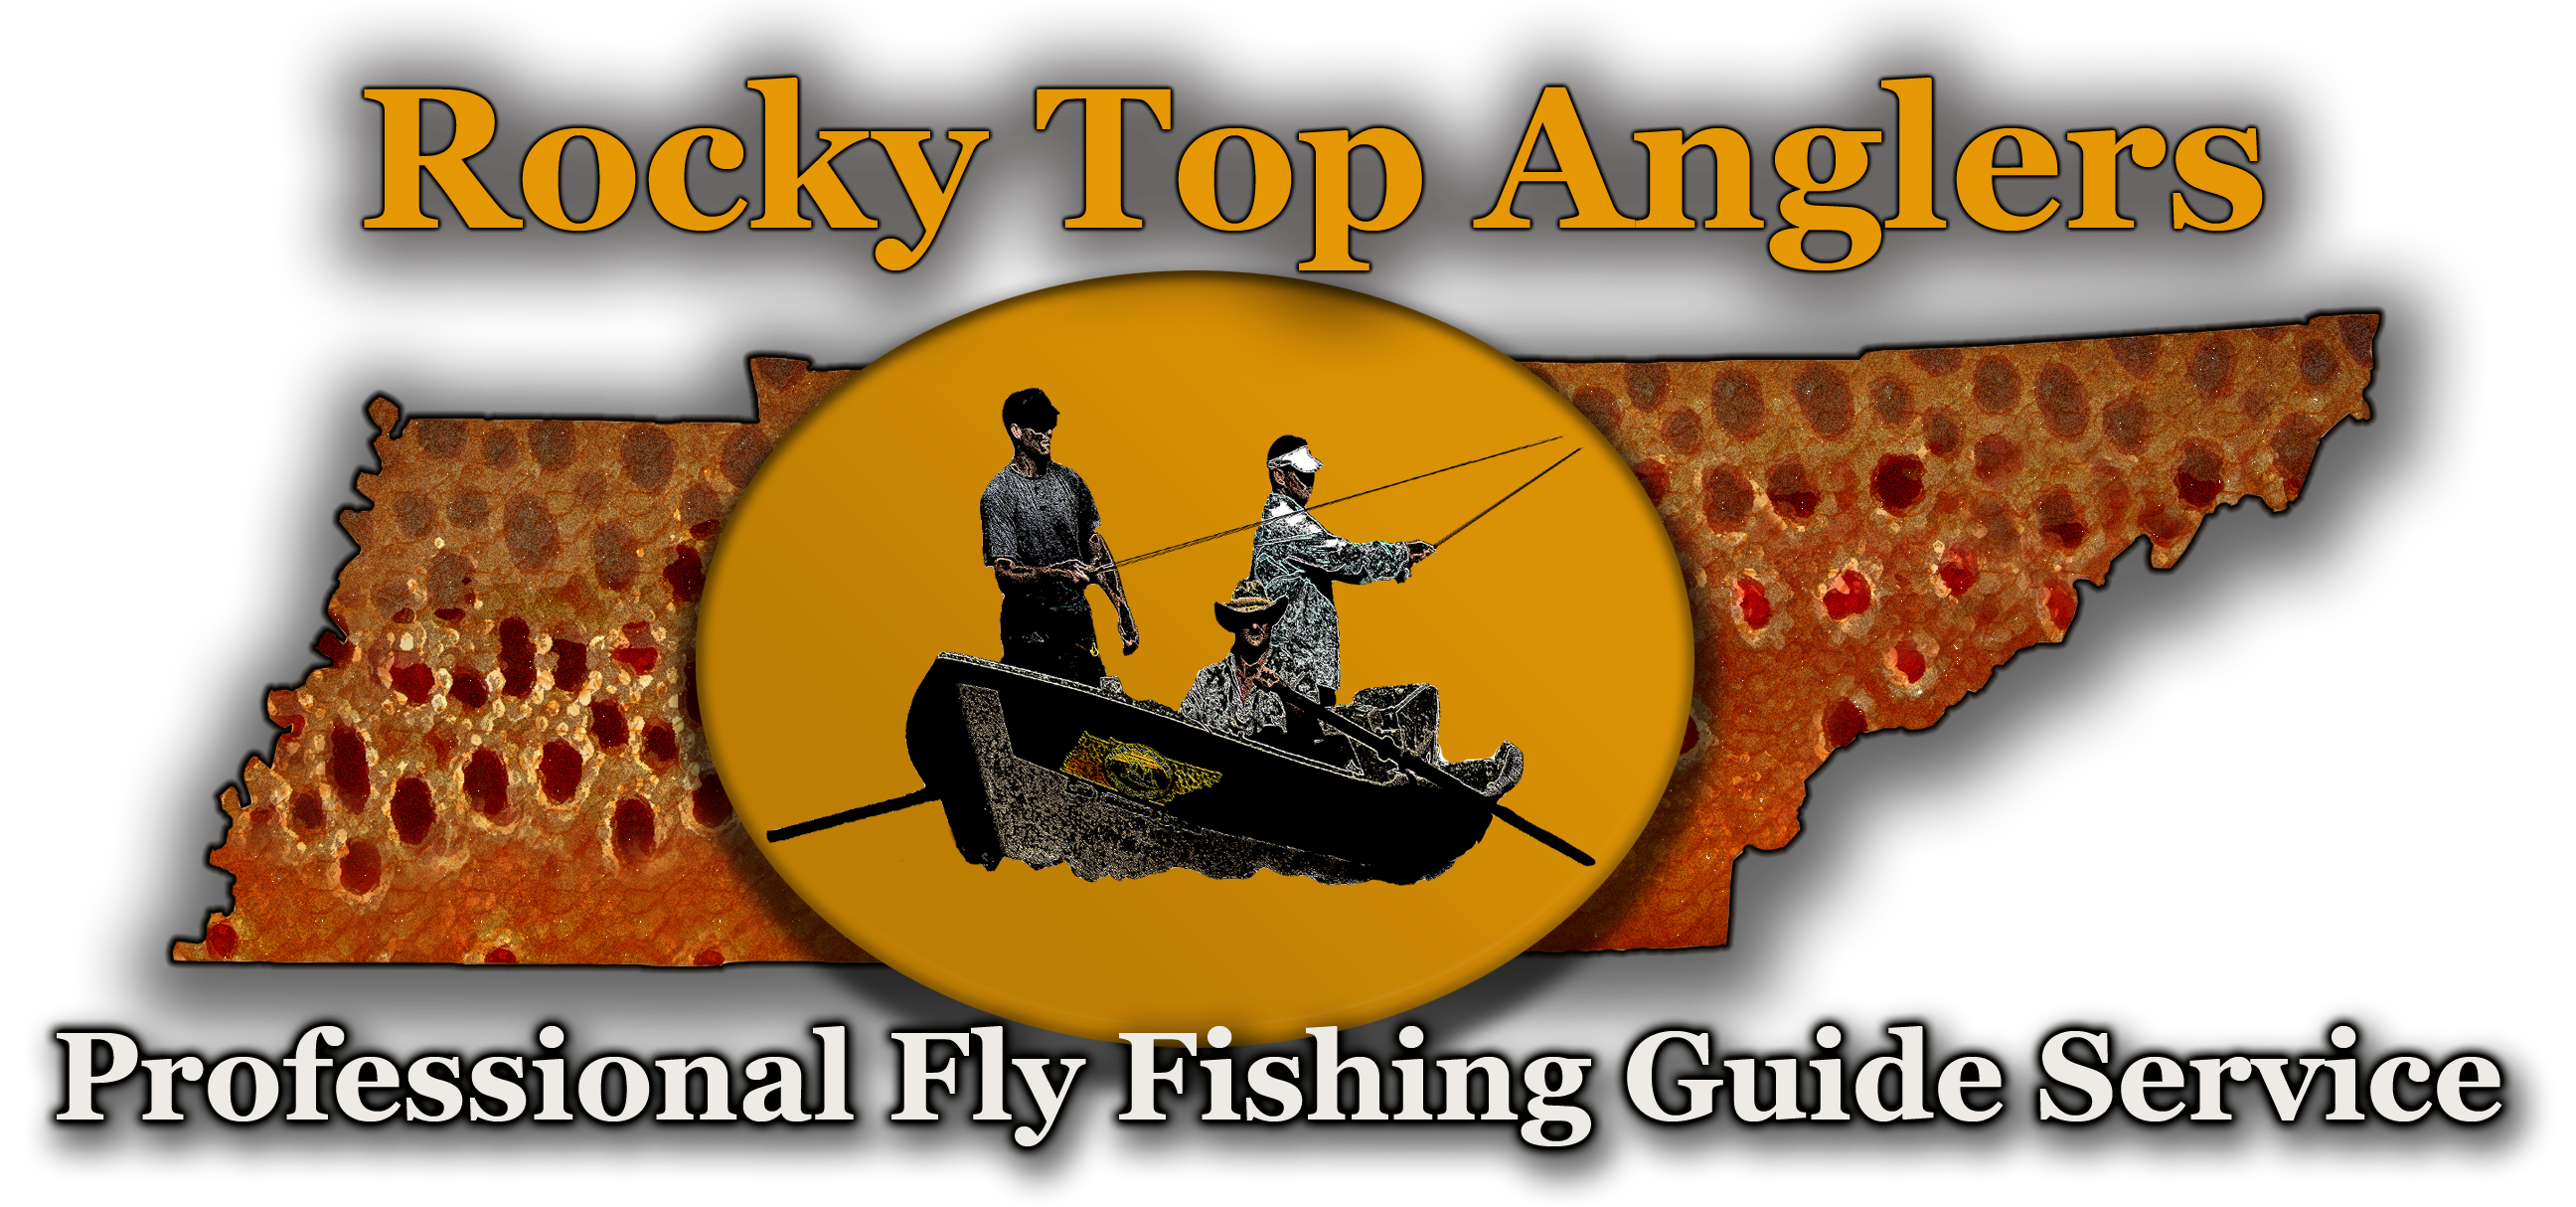 Rocky Top Anglers Tennessee's most popular fly fishing guide service.